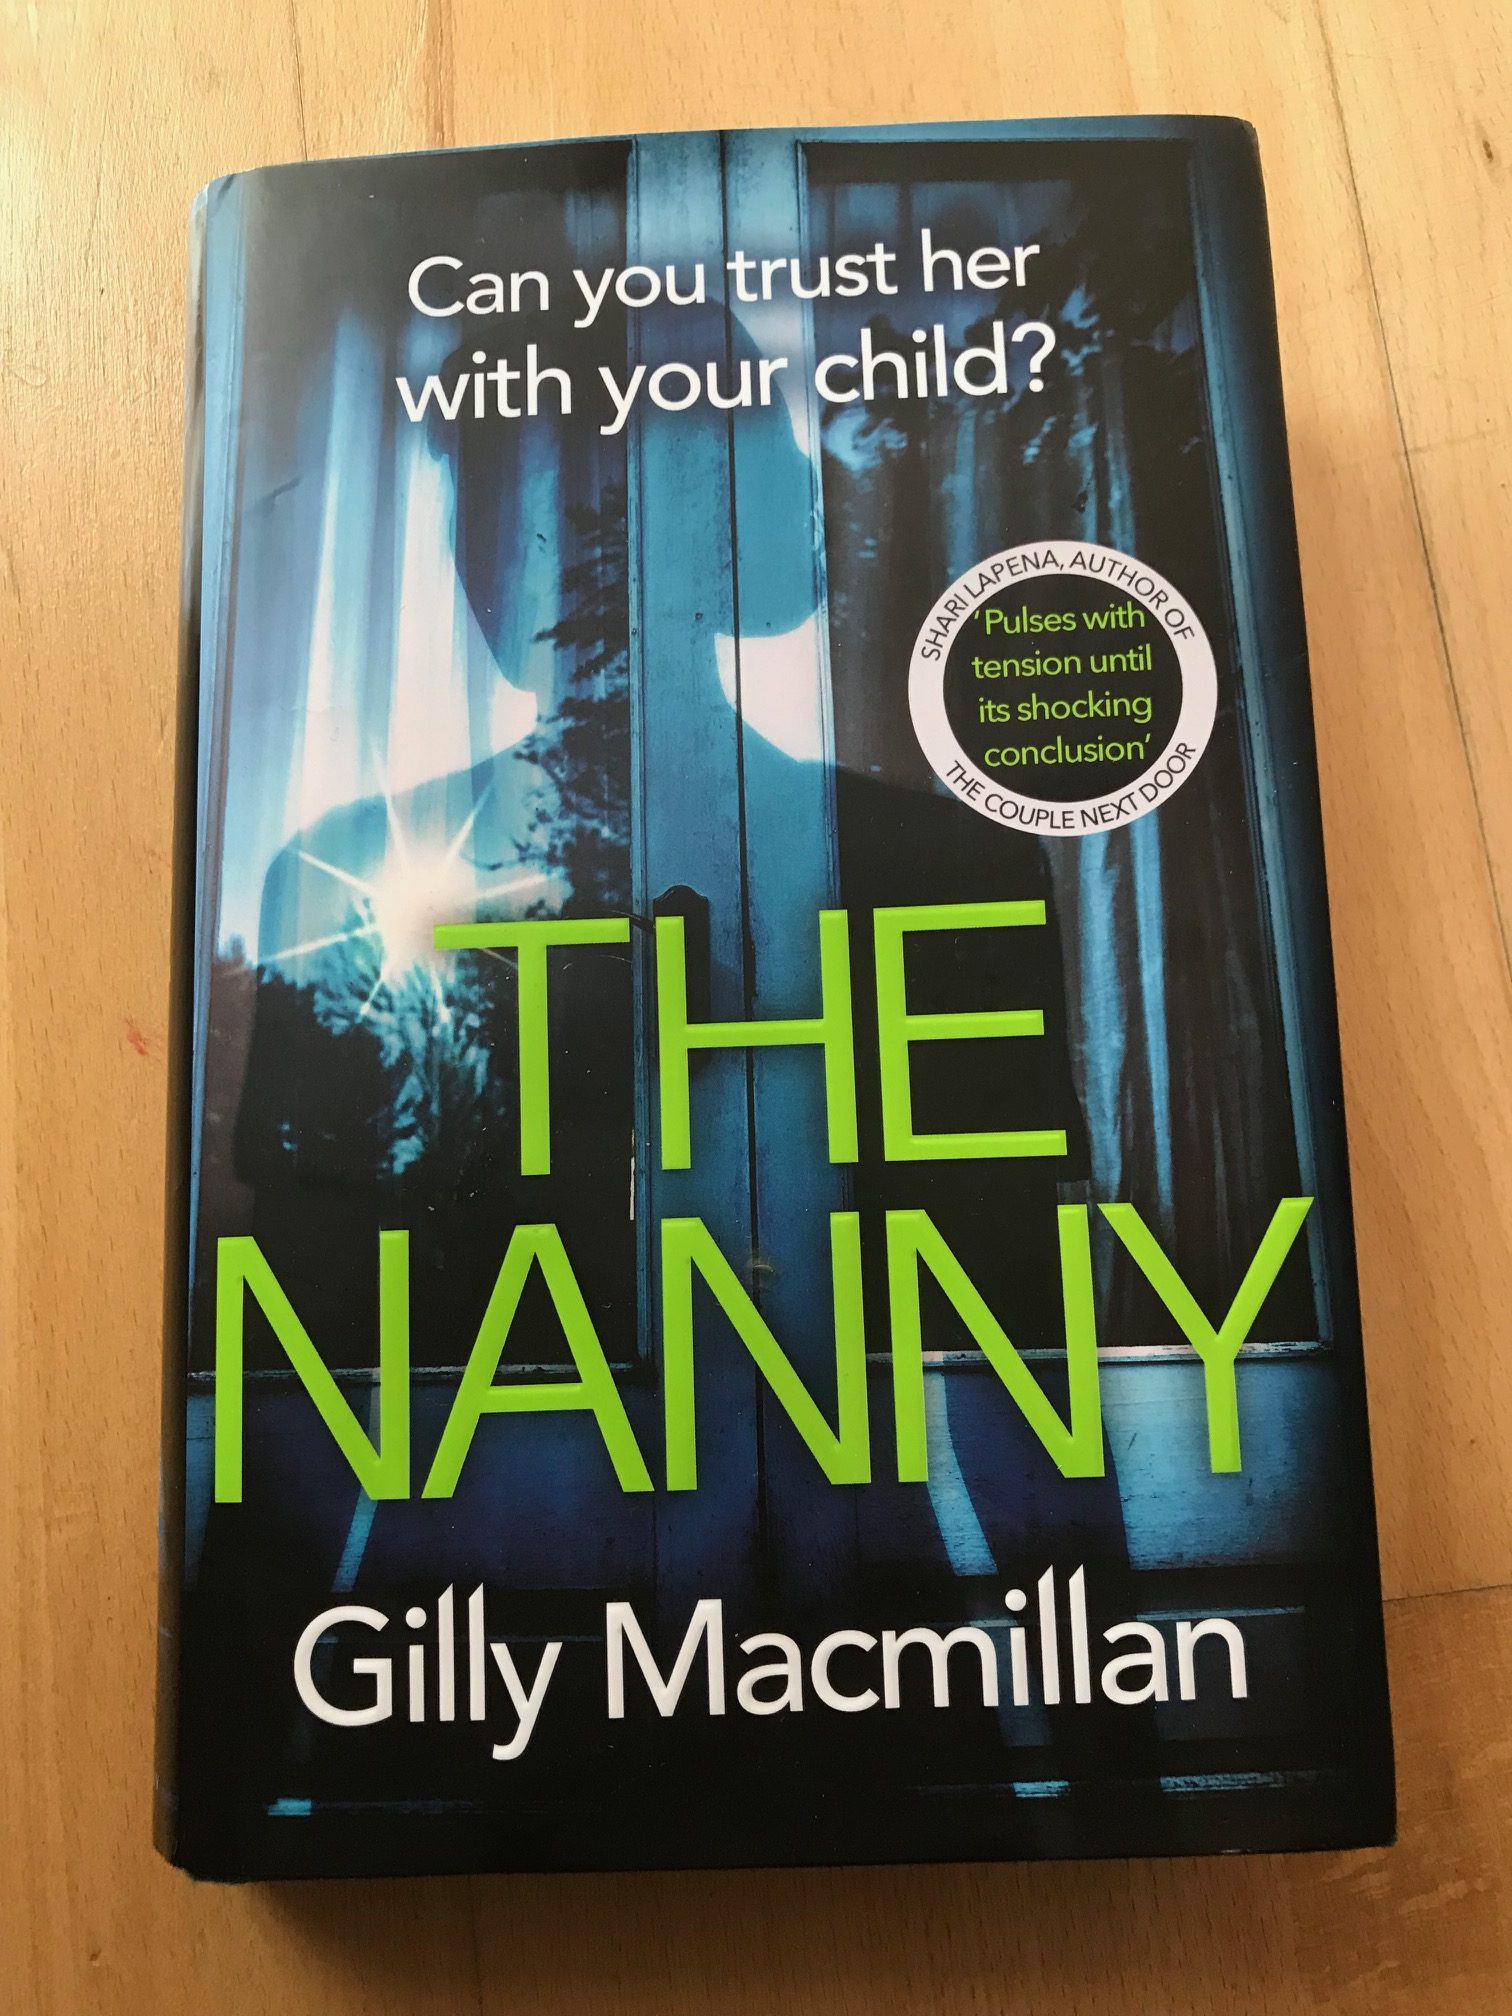 The Nanny Gilly Macmillan Book Review » Frost Magazine1512 x 2016